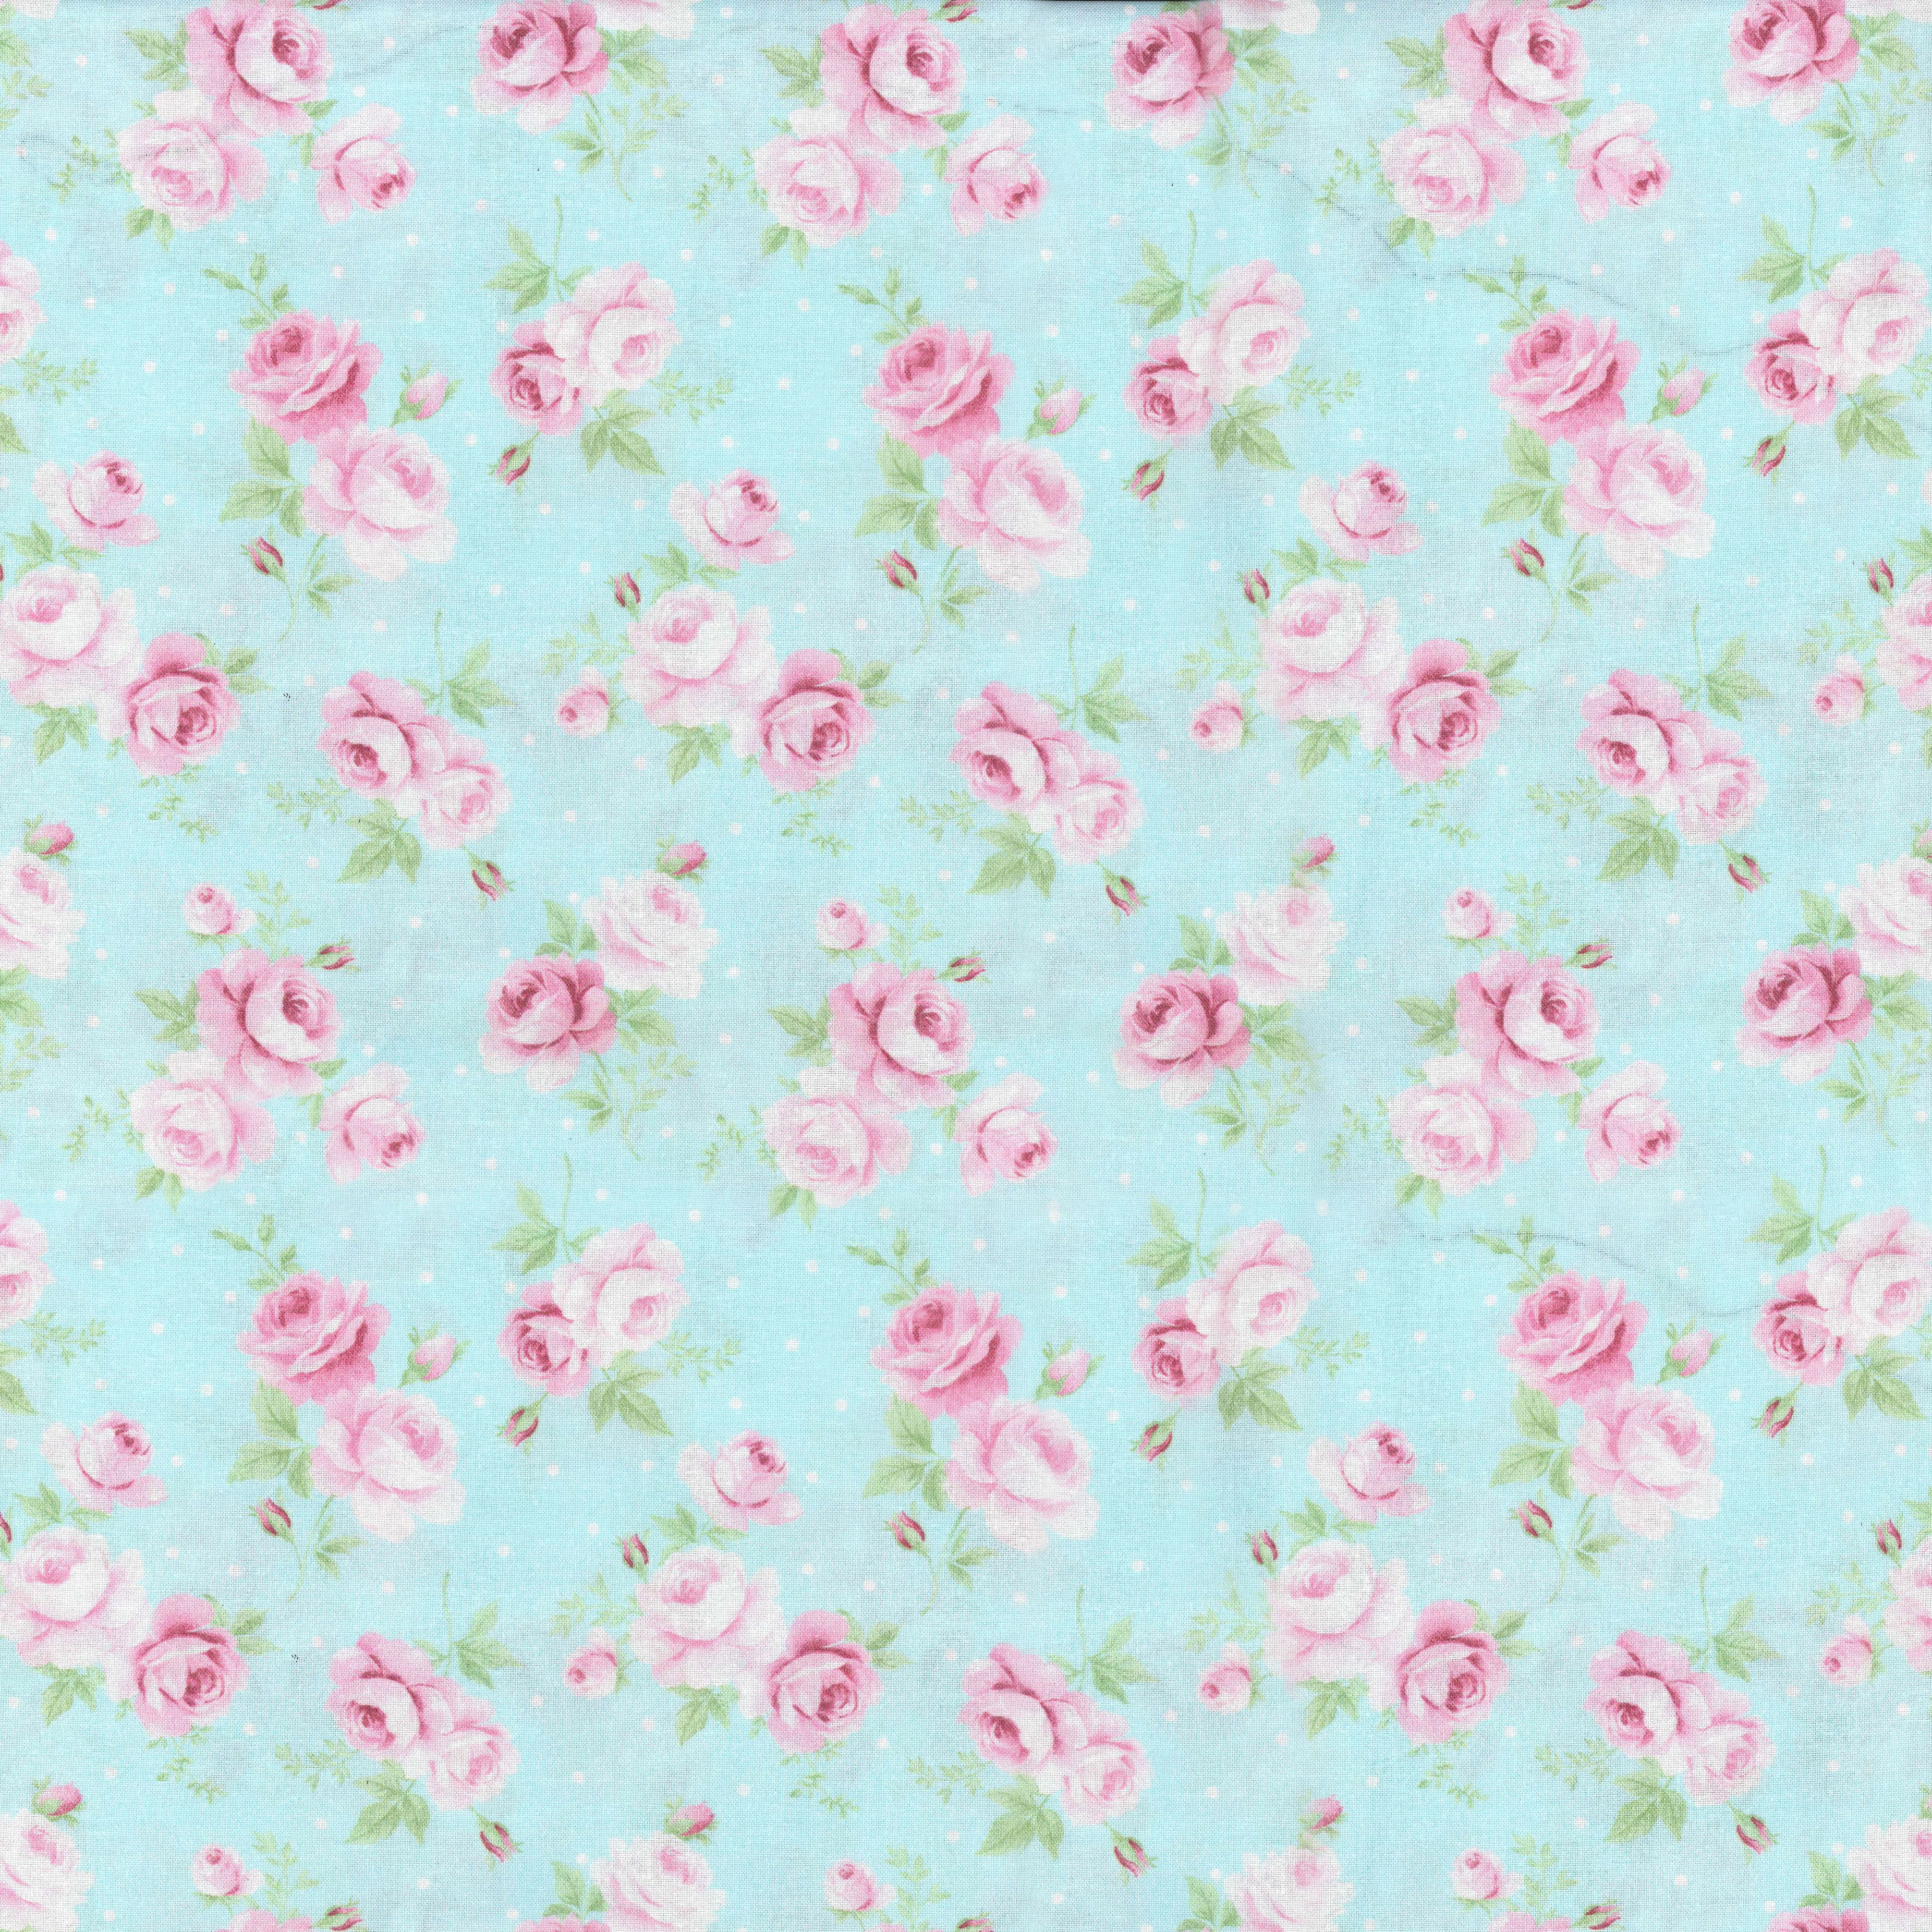 Fabric Traditions Light Blue Roses with Dots Cotton Fabric